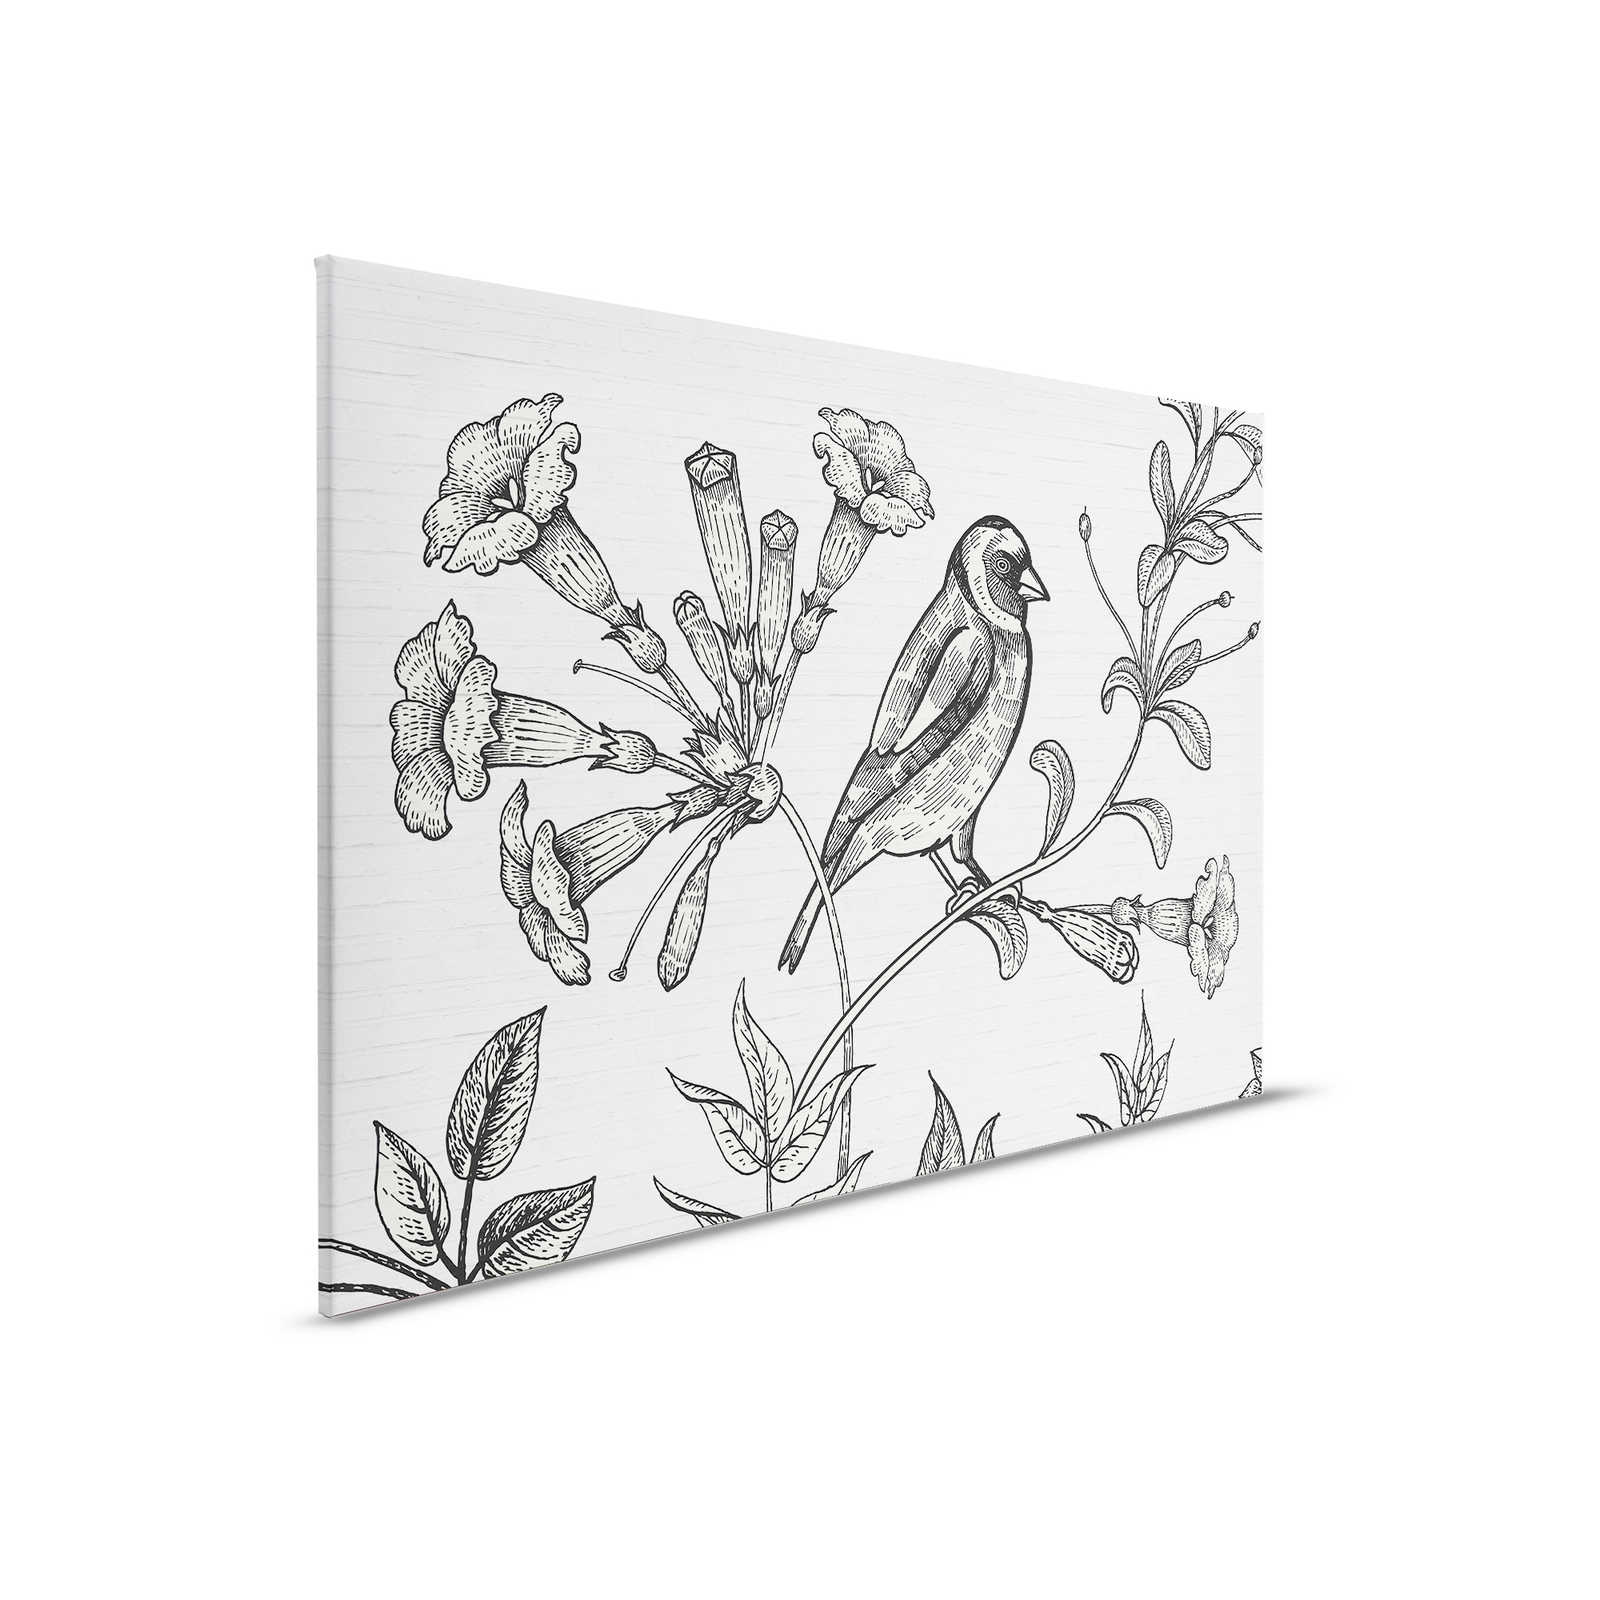 Stone Wall Canvas Painting with Nature Design in Drawing Style - 0.90 m x 0.60 m
